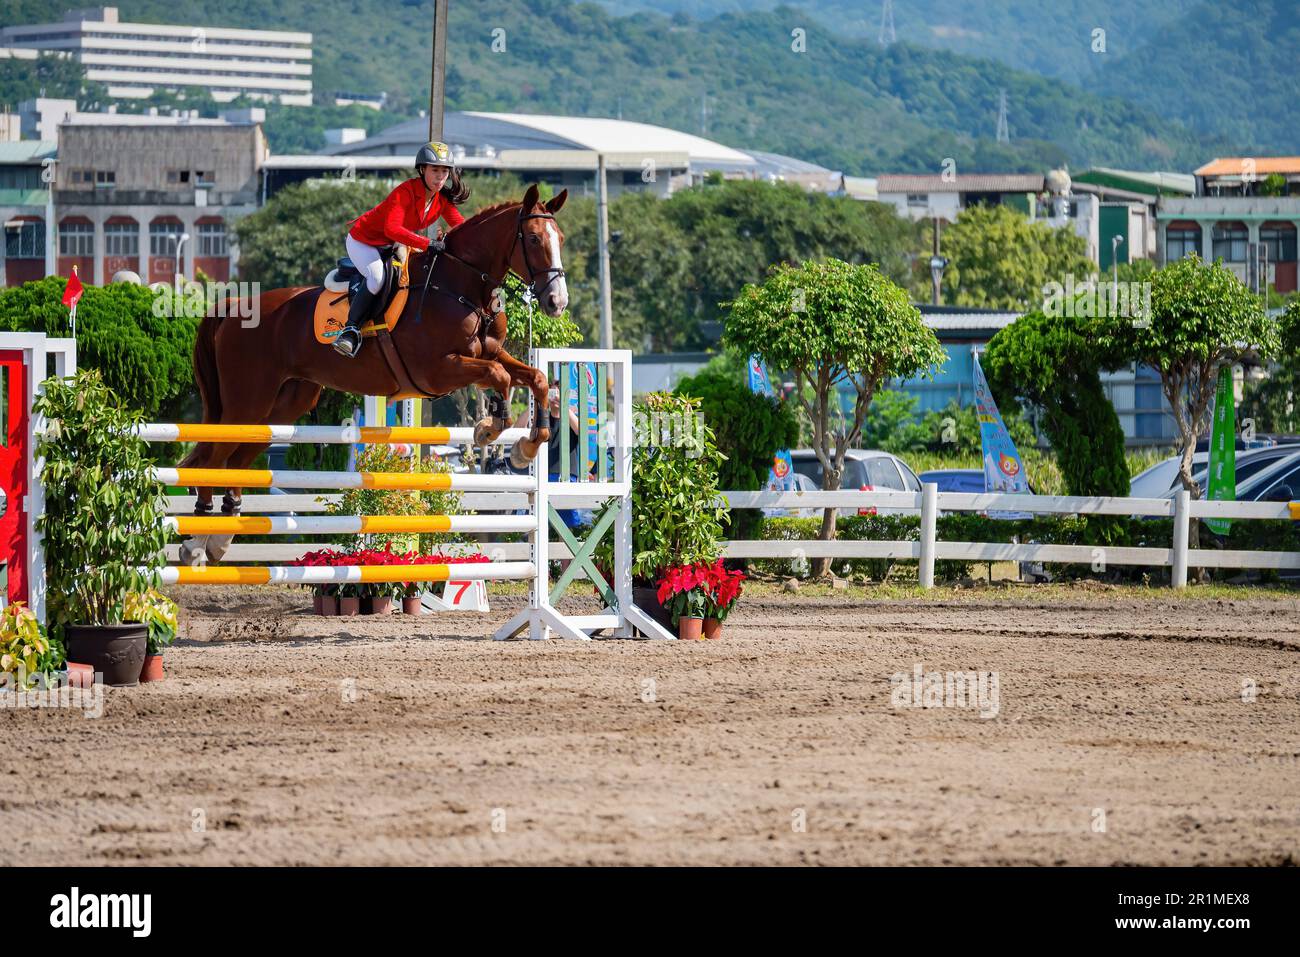 Taiwan, MAR 22 2013 - Sunny view of the equestrian in The National Games Stock Photo